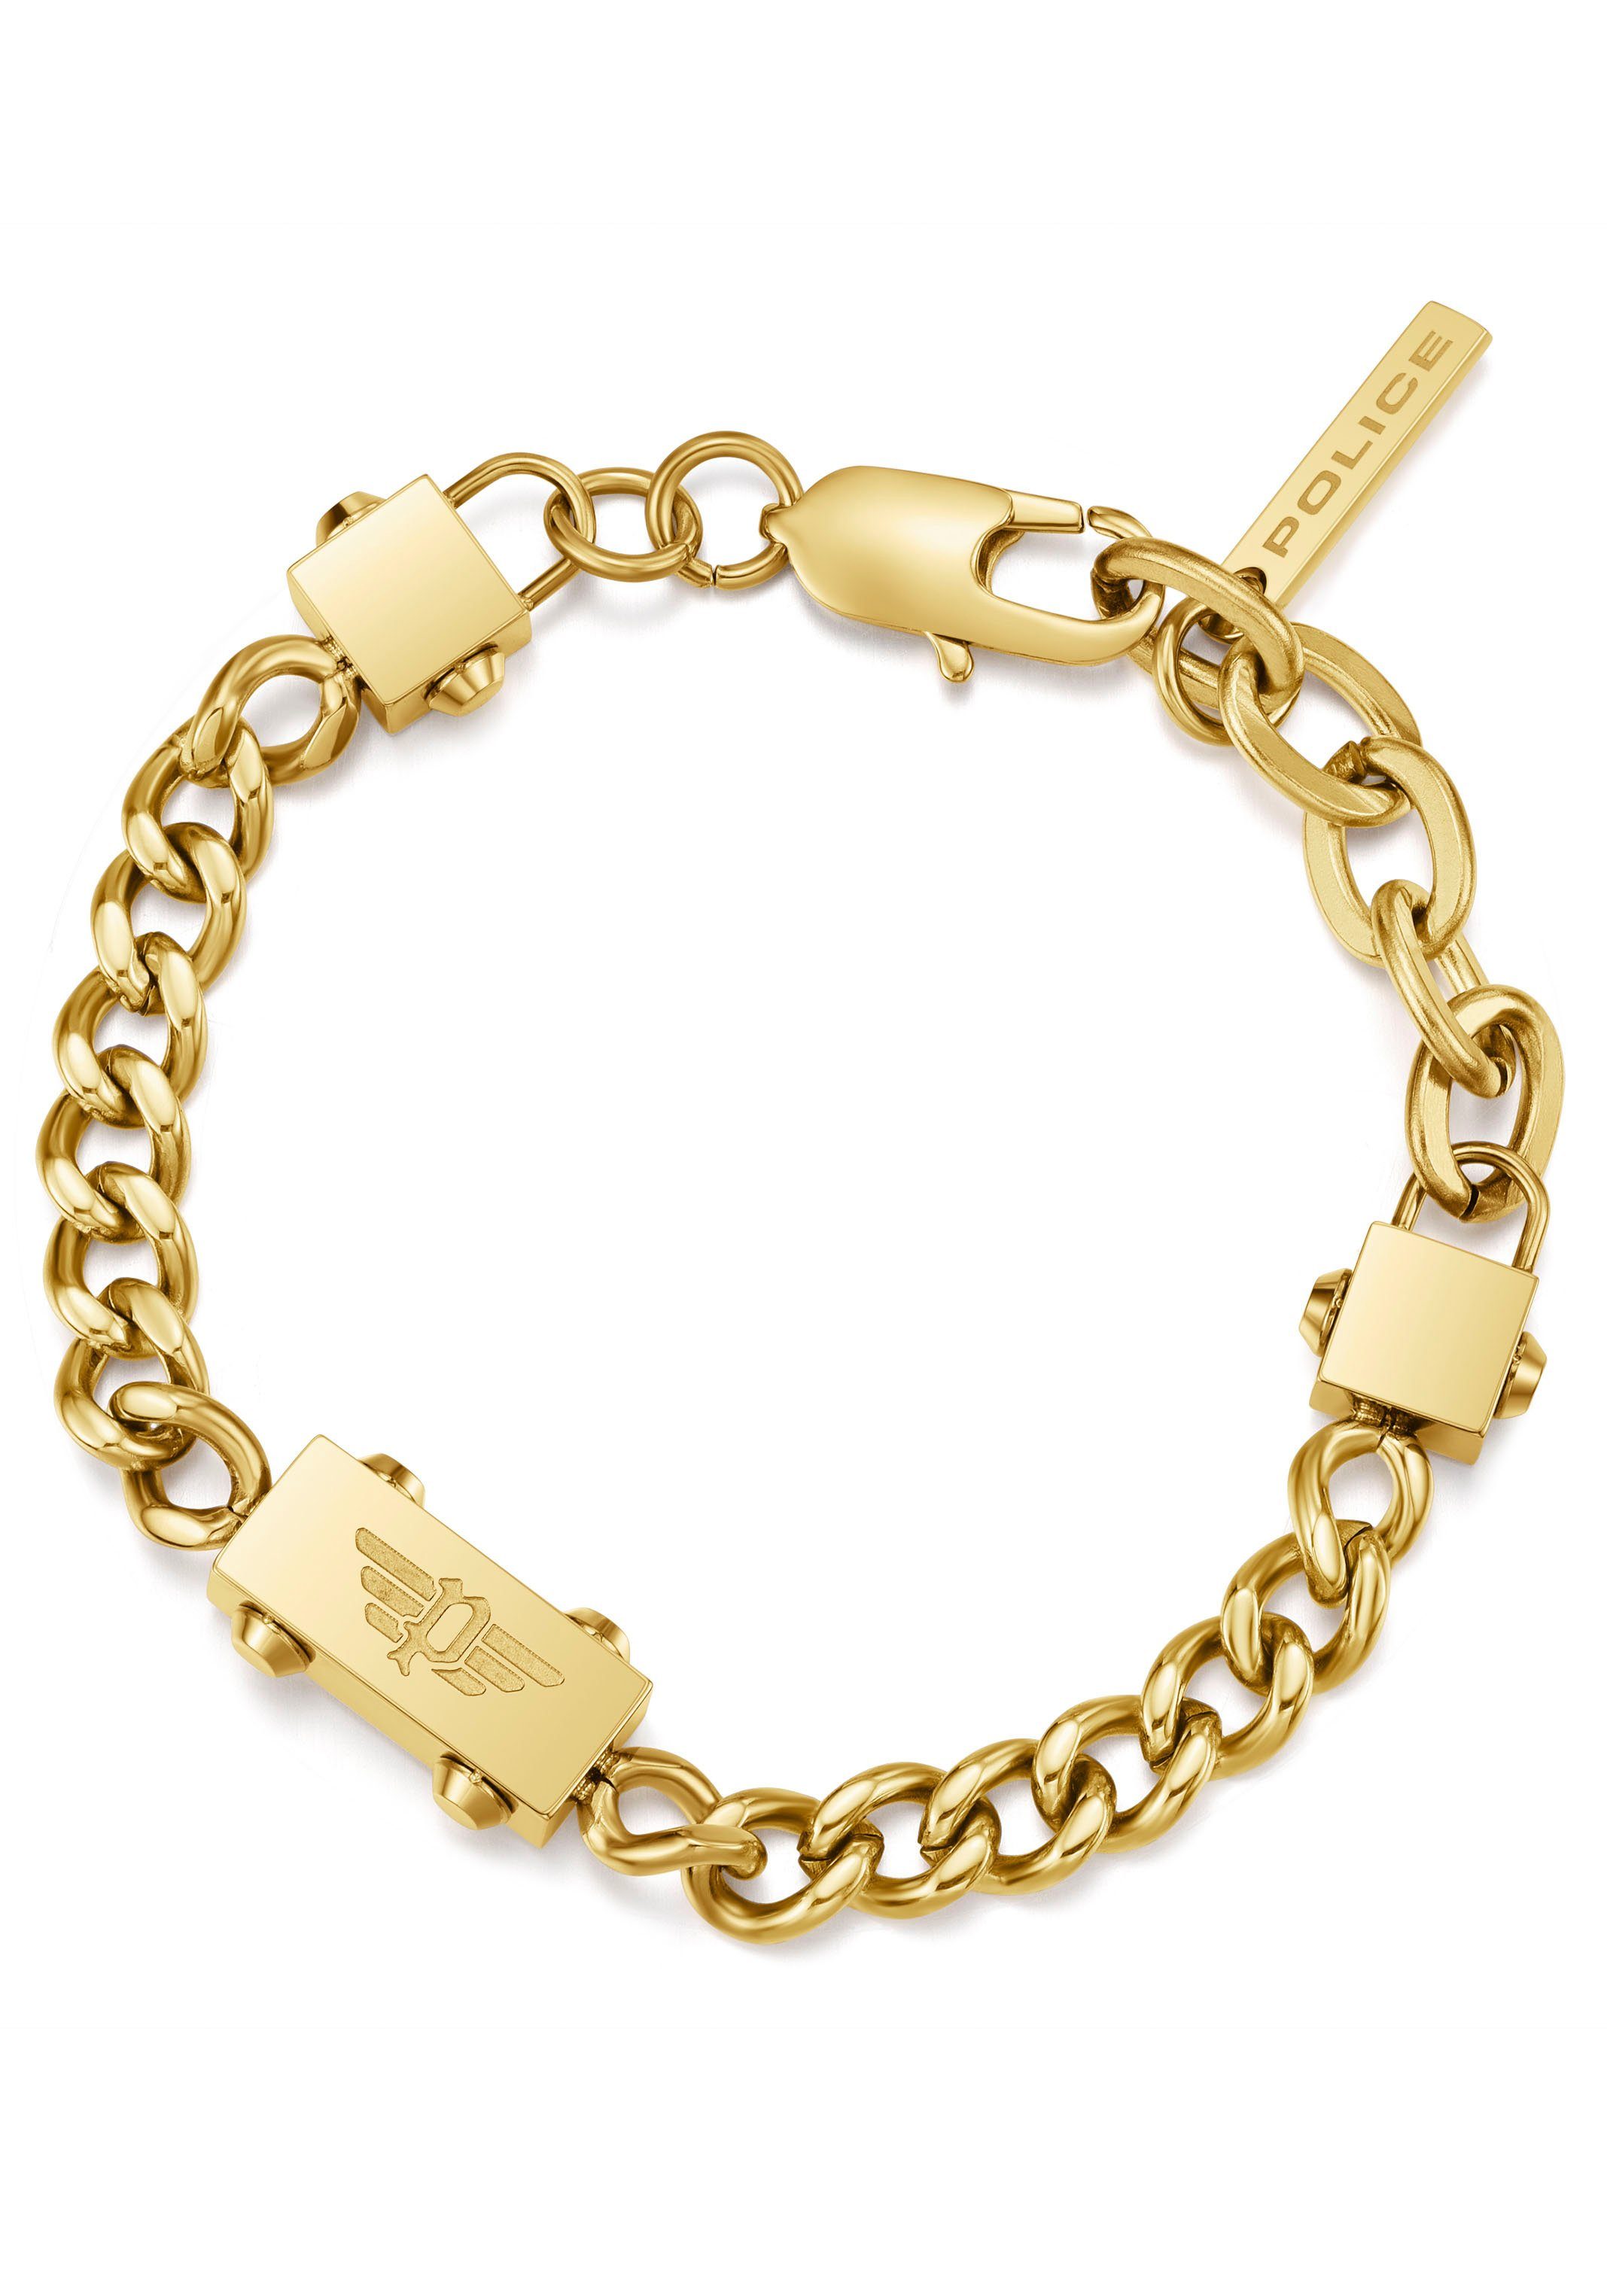 Armband Police gelbgoldfarben PEAGB0002102, PEAGB0002106 CHAINED,